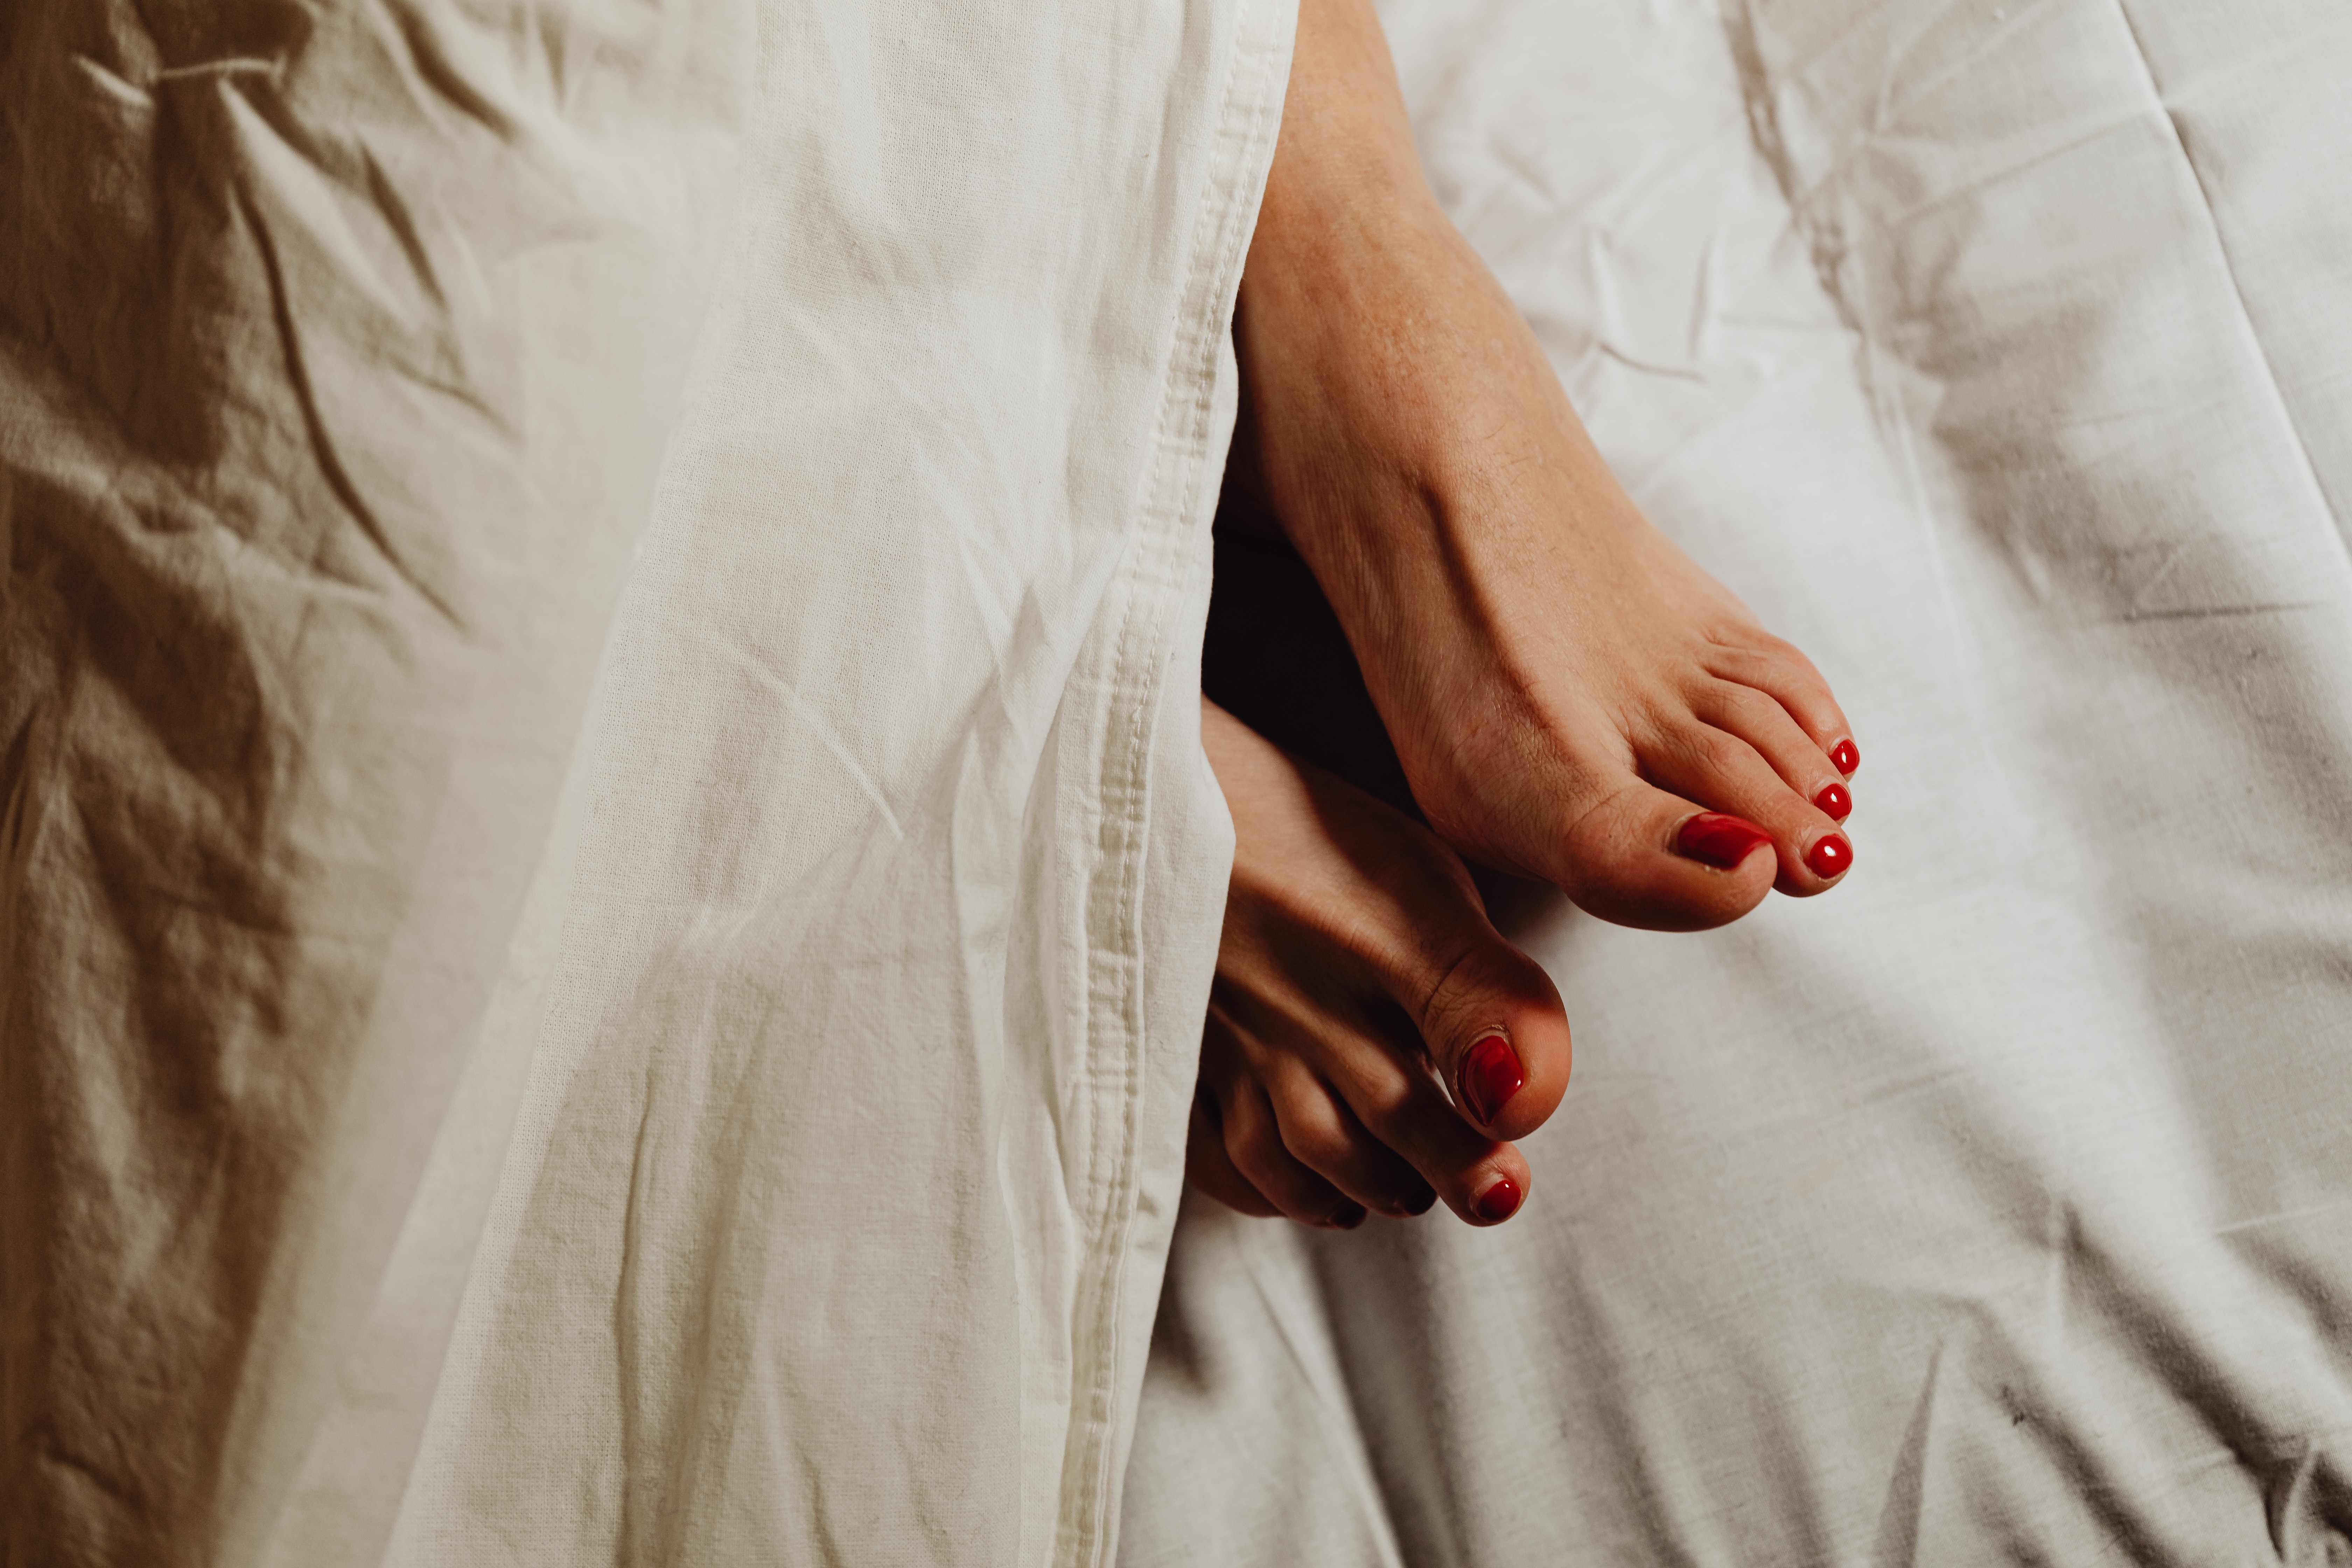 A picture of a woman's feet under sheet covers | Source: Pexels